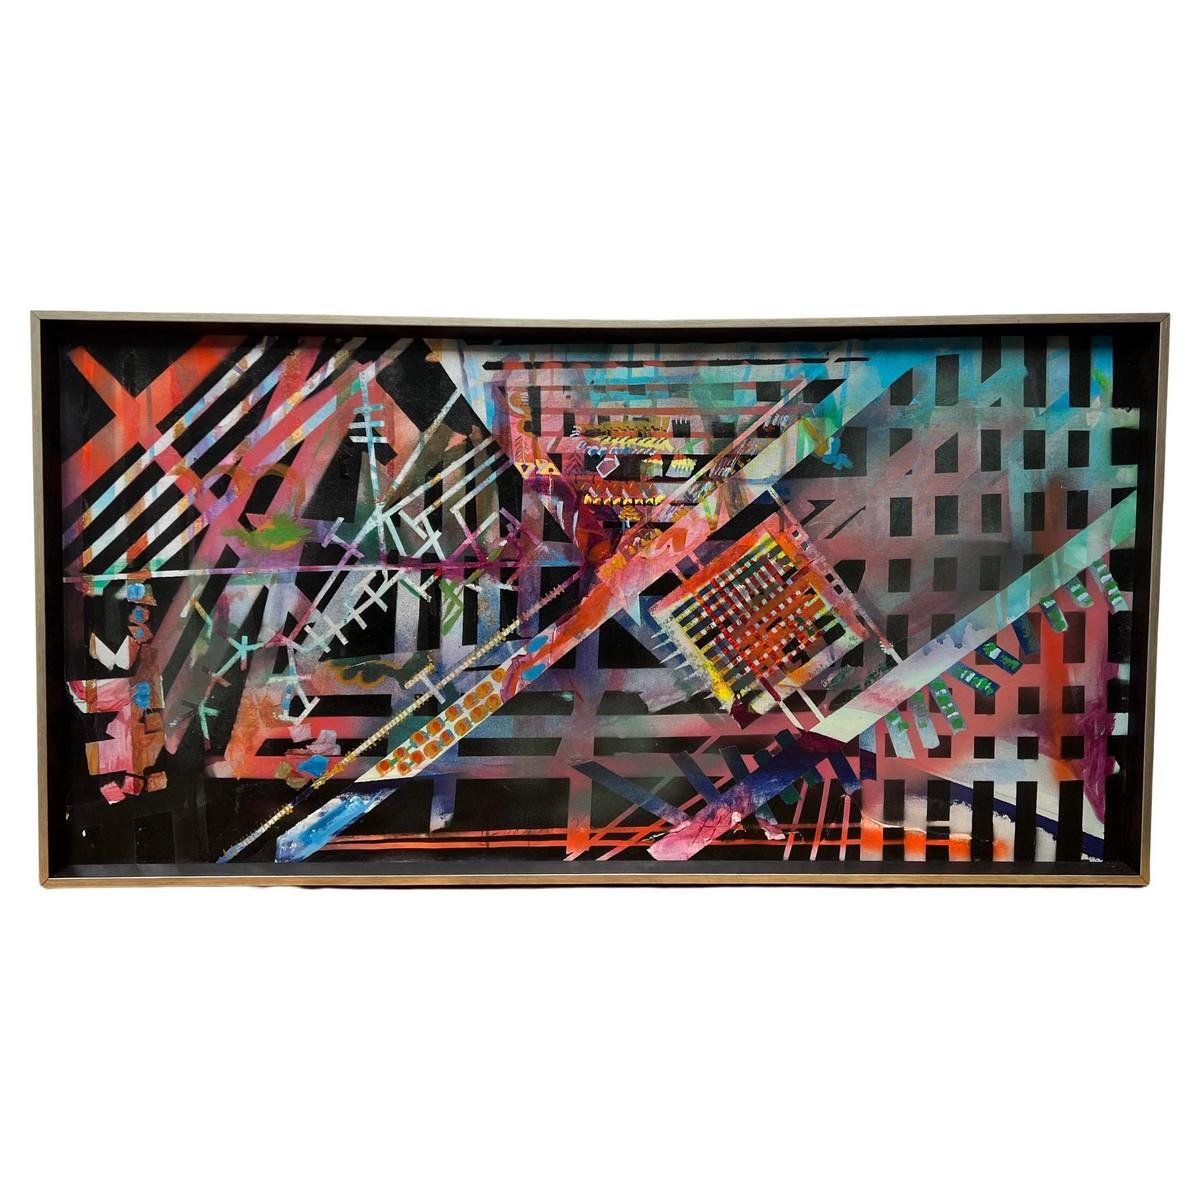 In this painting by Charles Jupiter Hamilton's "Downtown San Francisco," the pulsating heartbeat of the city comes alive in a kaleidoscope of color and form. This acrylic abstract serves as a psychedelic map of urban vitality, capturing the essence